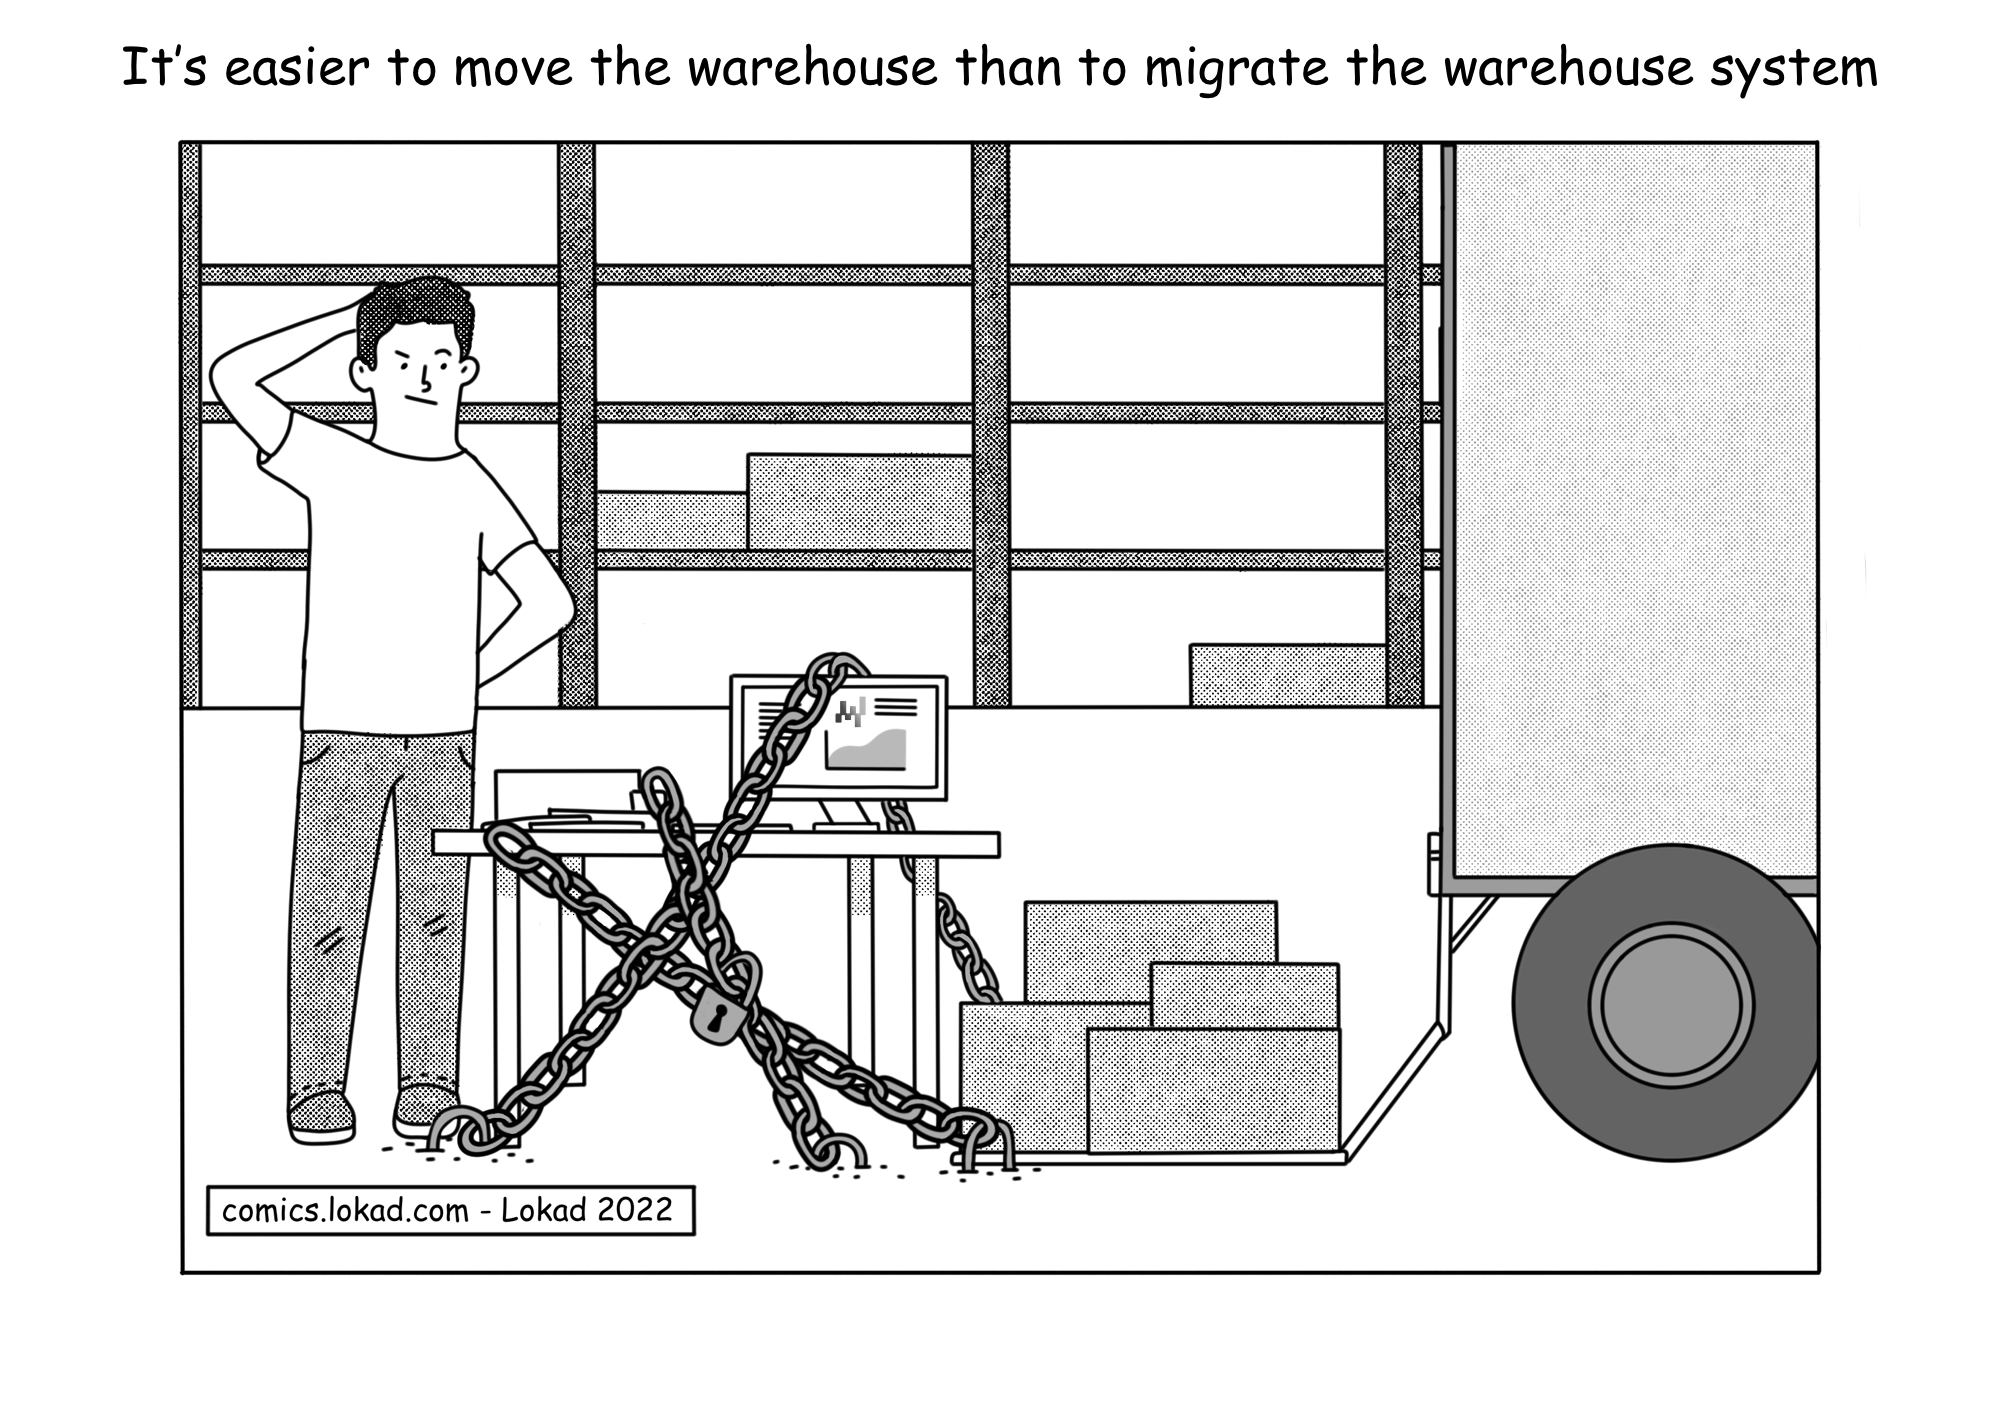 It’s easier to move the warehouse than to migrate the warehouse system